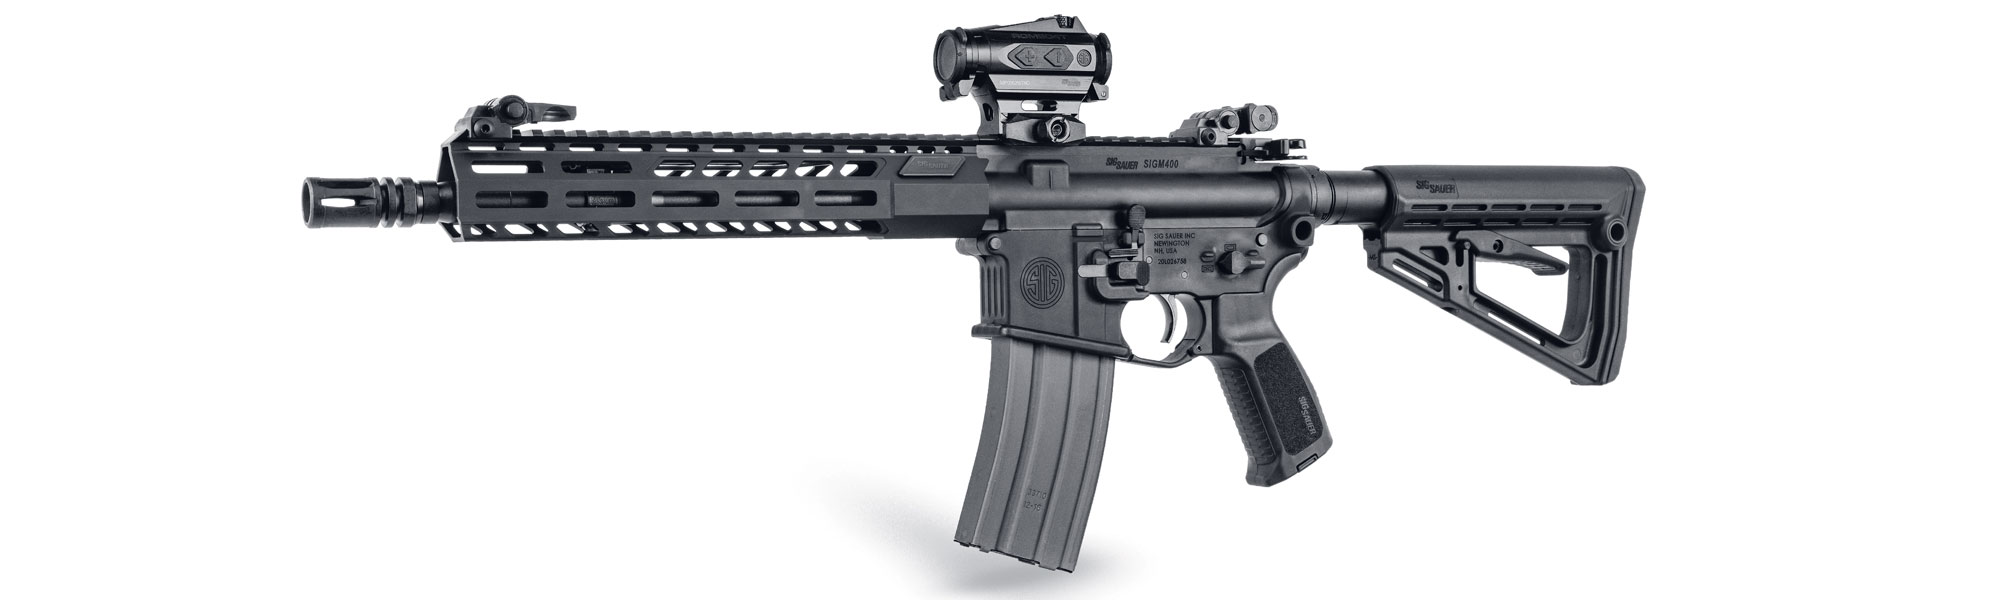 This is the SIGM400 presented for defense applications. 